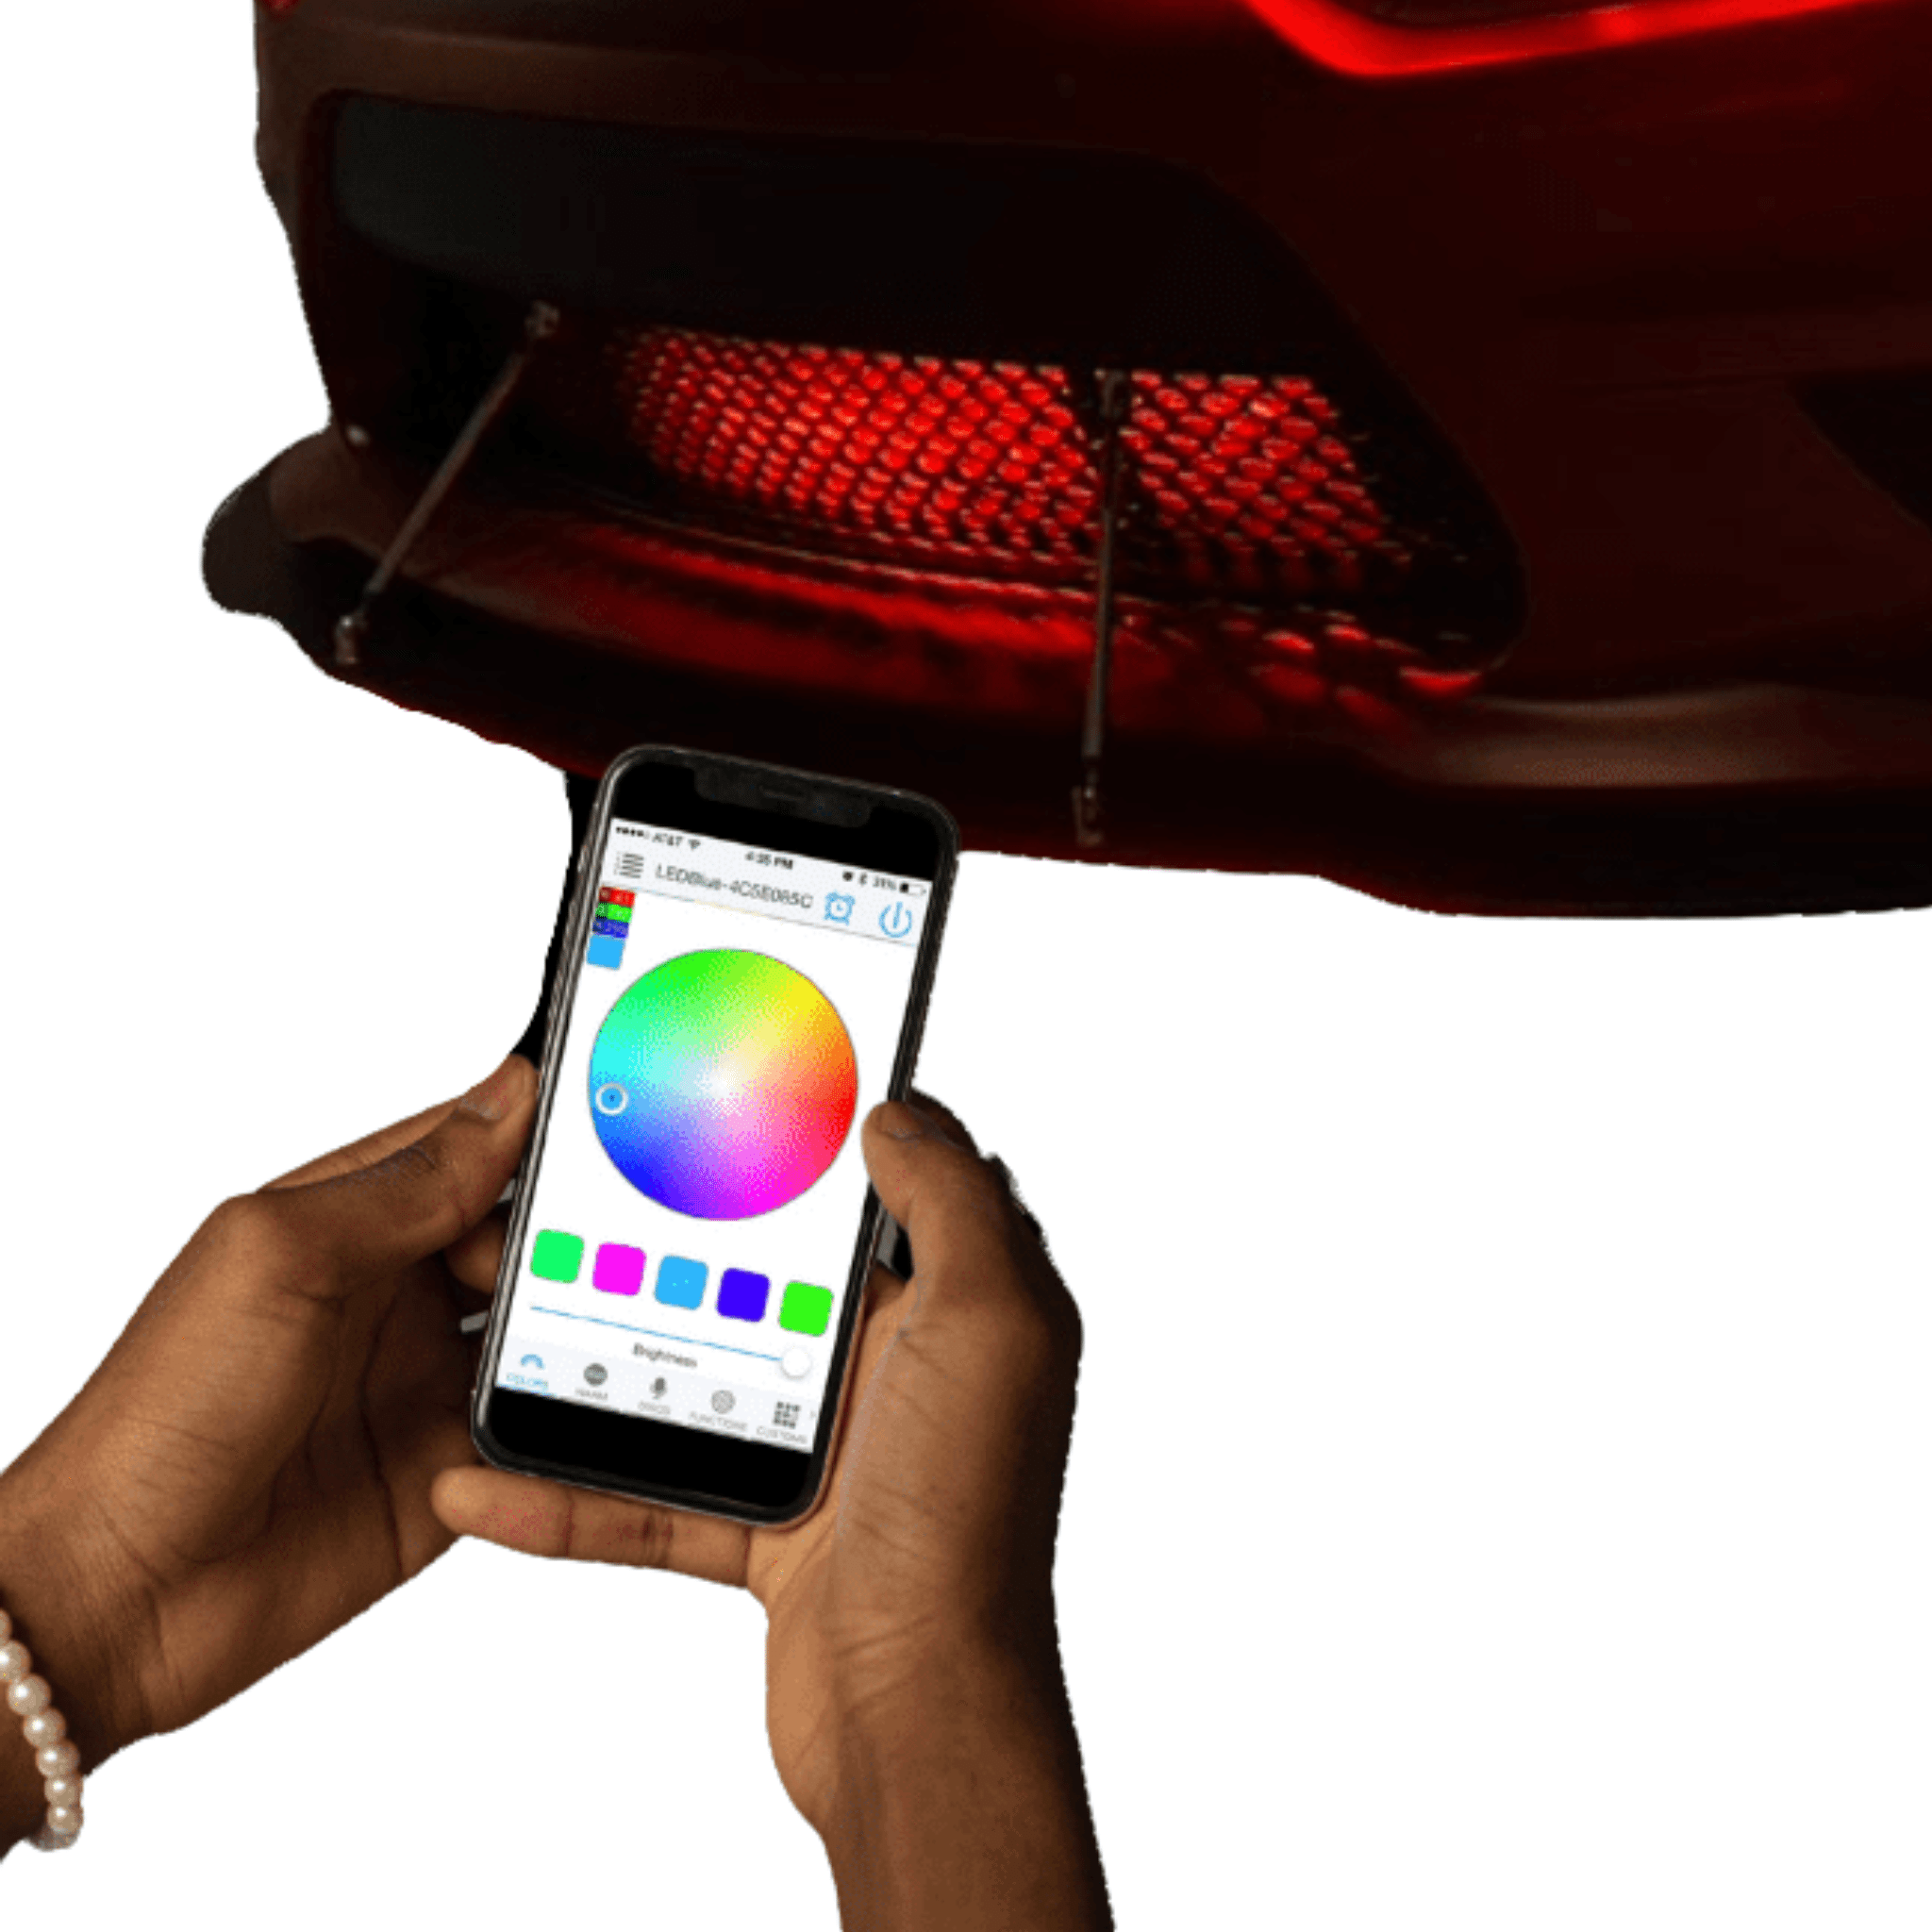 Add Bluetooth Controller to my Previous Order - RGB Halo Kits Multicolor Flow Series Color Chasing RGBWA LED headlight kit Colorshift Oracle Lighting Trendz OneUpLighting Morimoto theretrofitsource AutoLEDTech Diode Dynamics